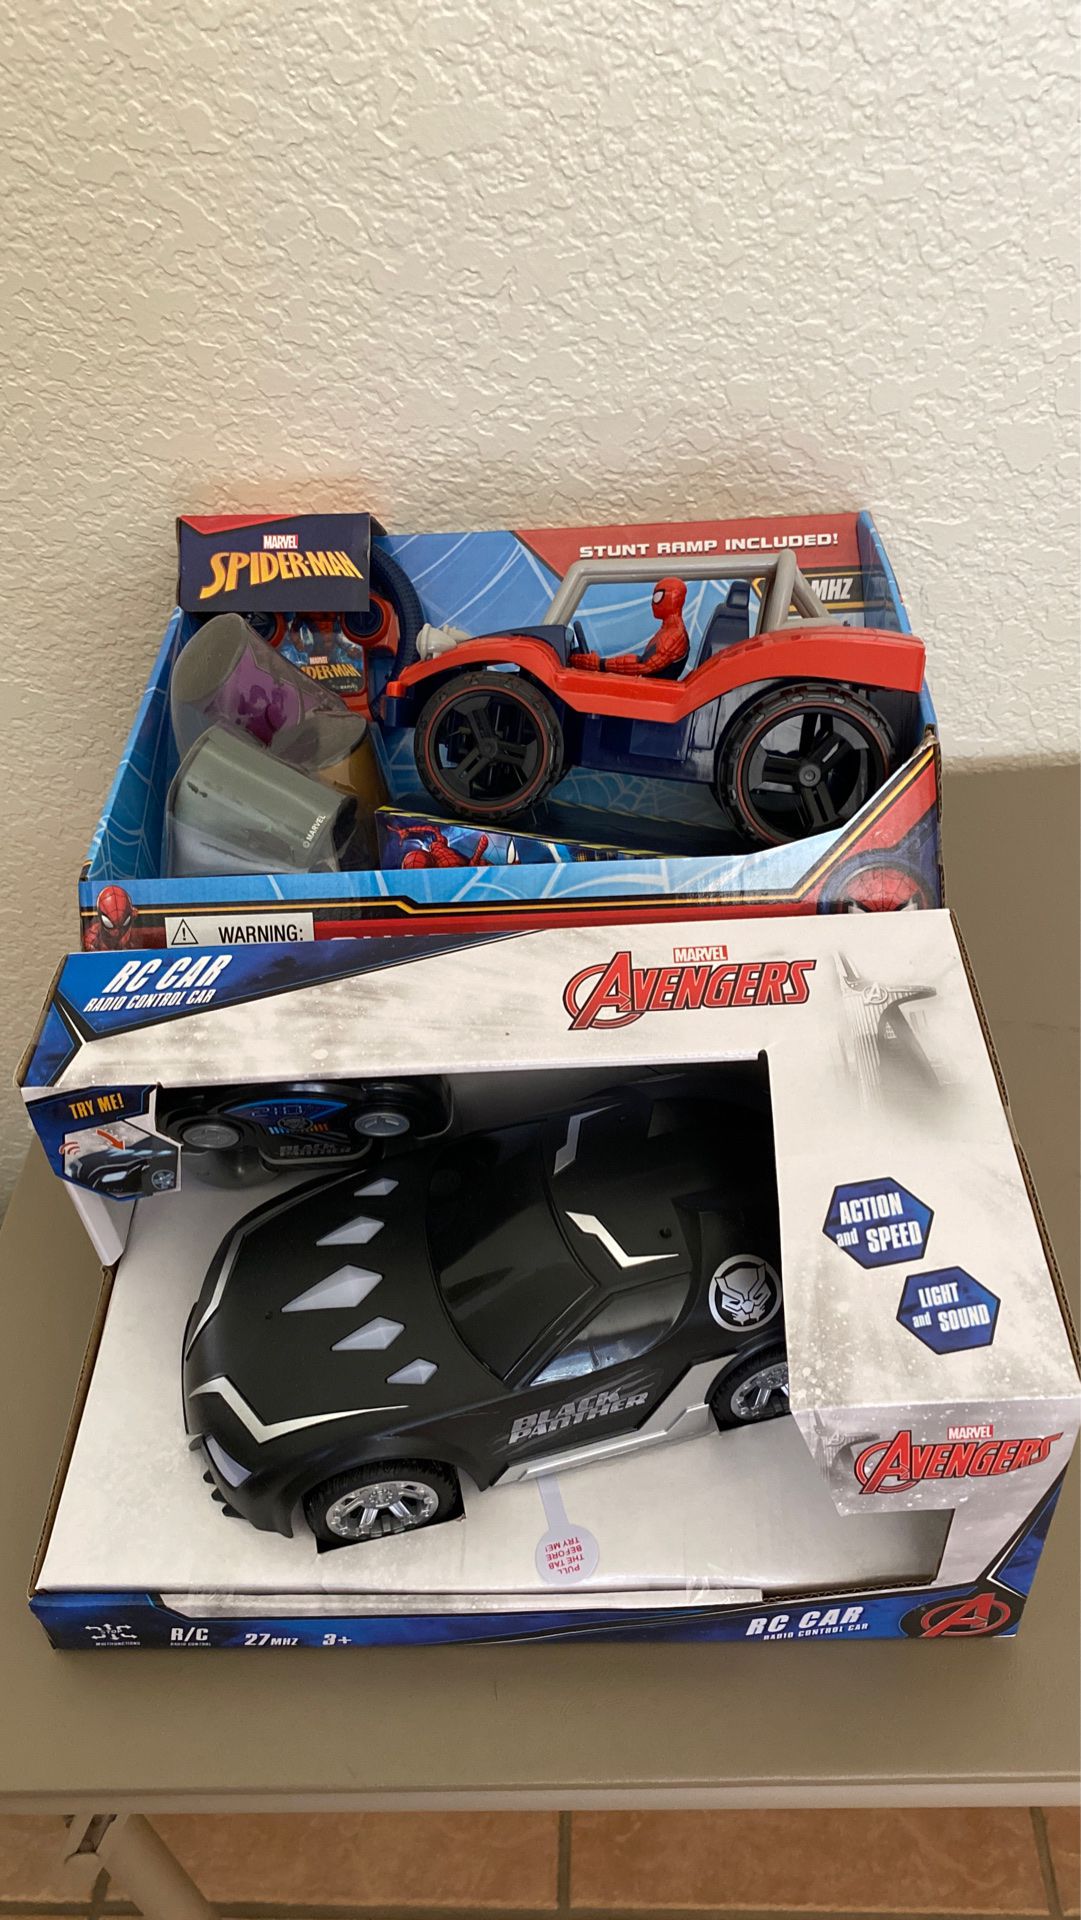 Spider-Man and Black Panther R/C New